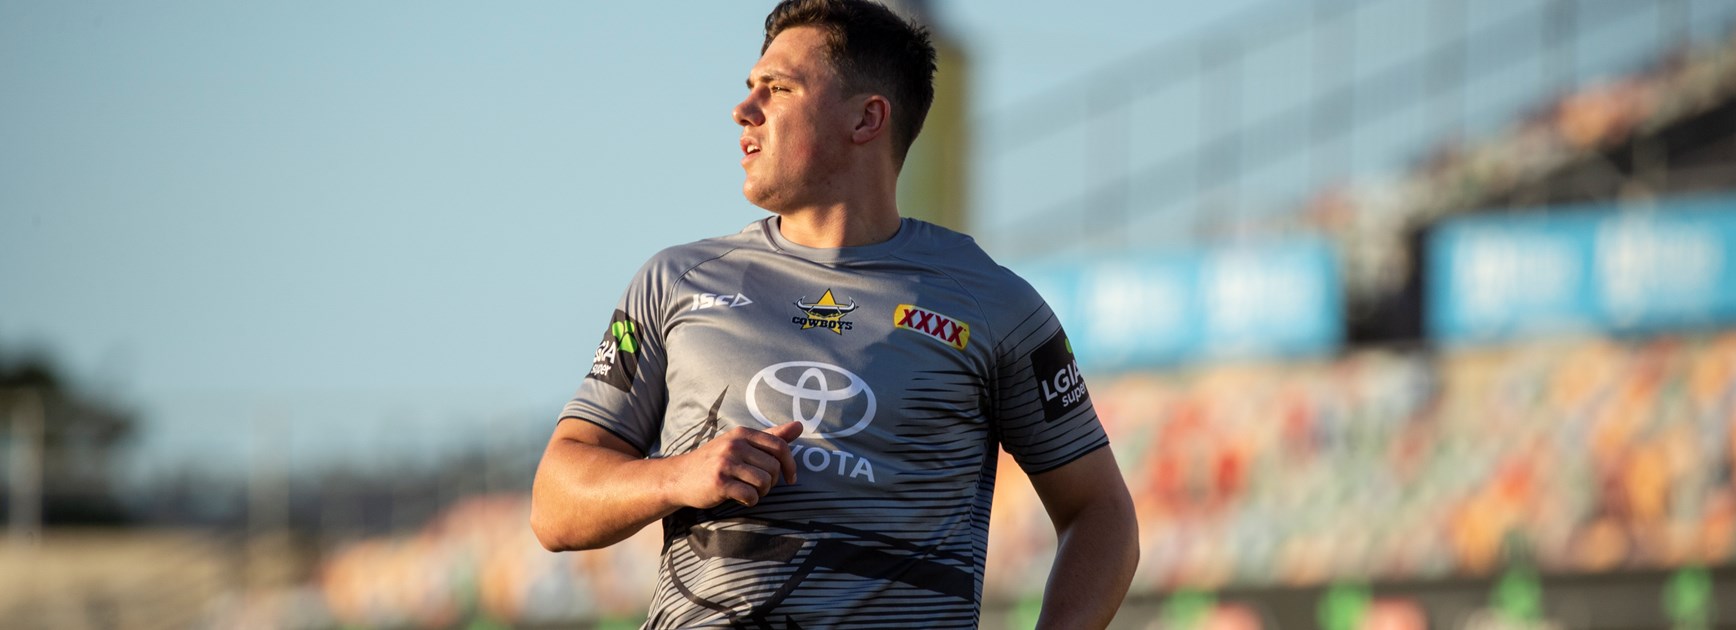 Drinkwater thirsty for action after mid-season switch from Storm